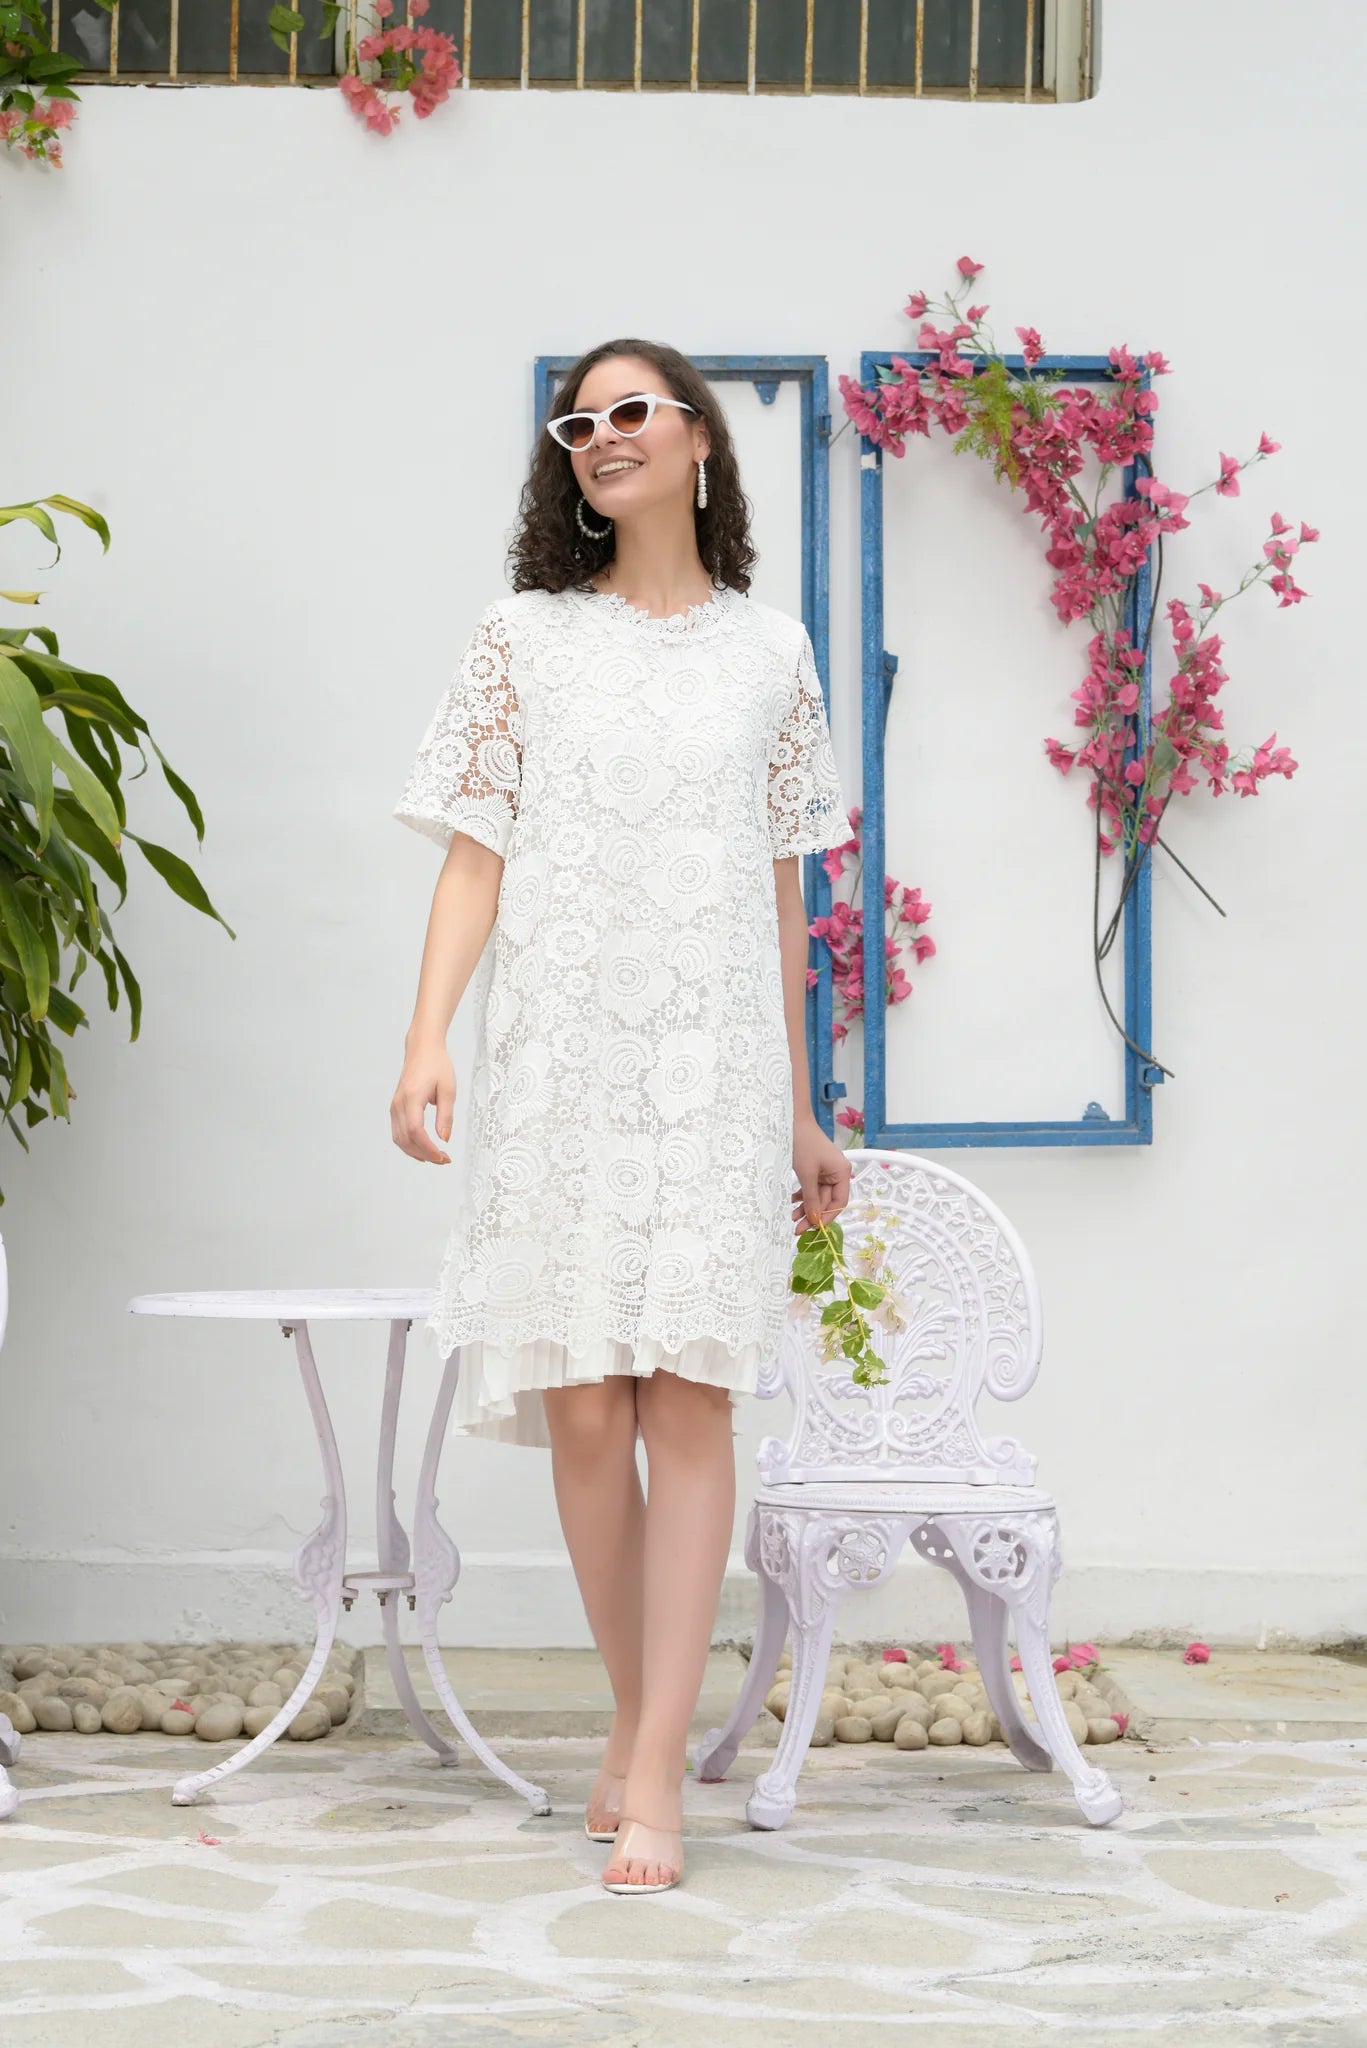 Image of Uniquely stylish and timeless, the Myra Mesh Daisy Lace Dress will make a statement at brunch or any special occasion. Crafted from soft white mesh lace, this elegant dress will make you look and feel beautiful. The dress features an intricate daisy lace design for a truly luxurious feel. Make a statement anywhere with this gorgeous dress!  From savoirfashions.com